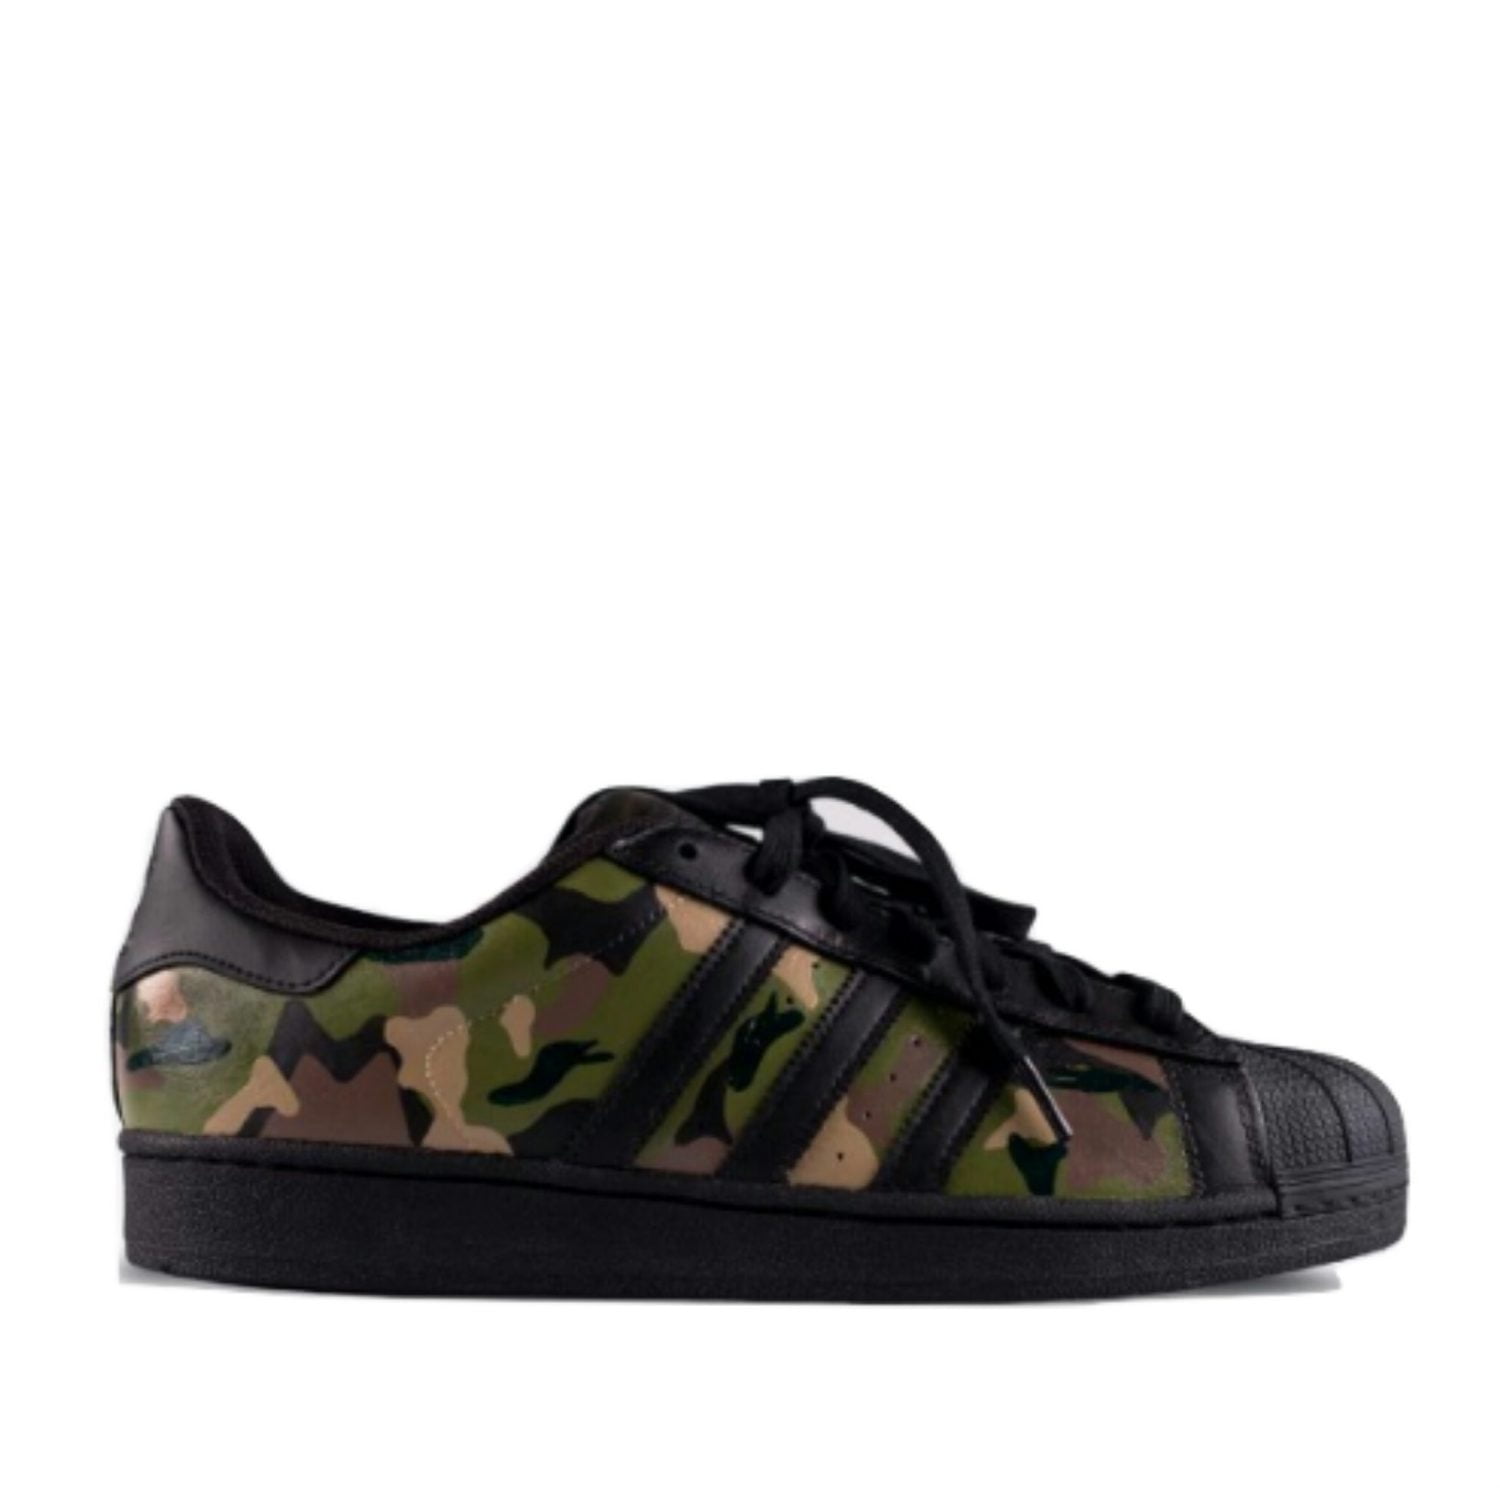 Adidas Superstar Earth Camo Shoes For 